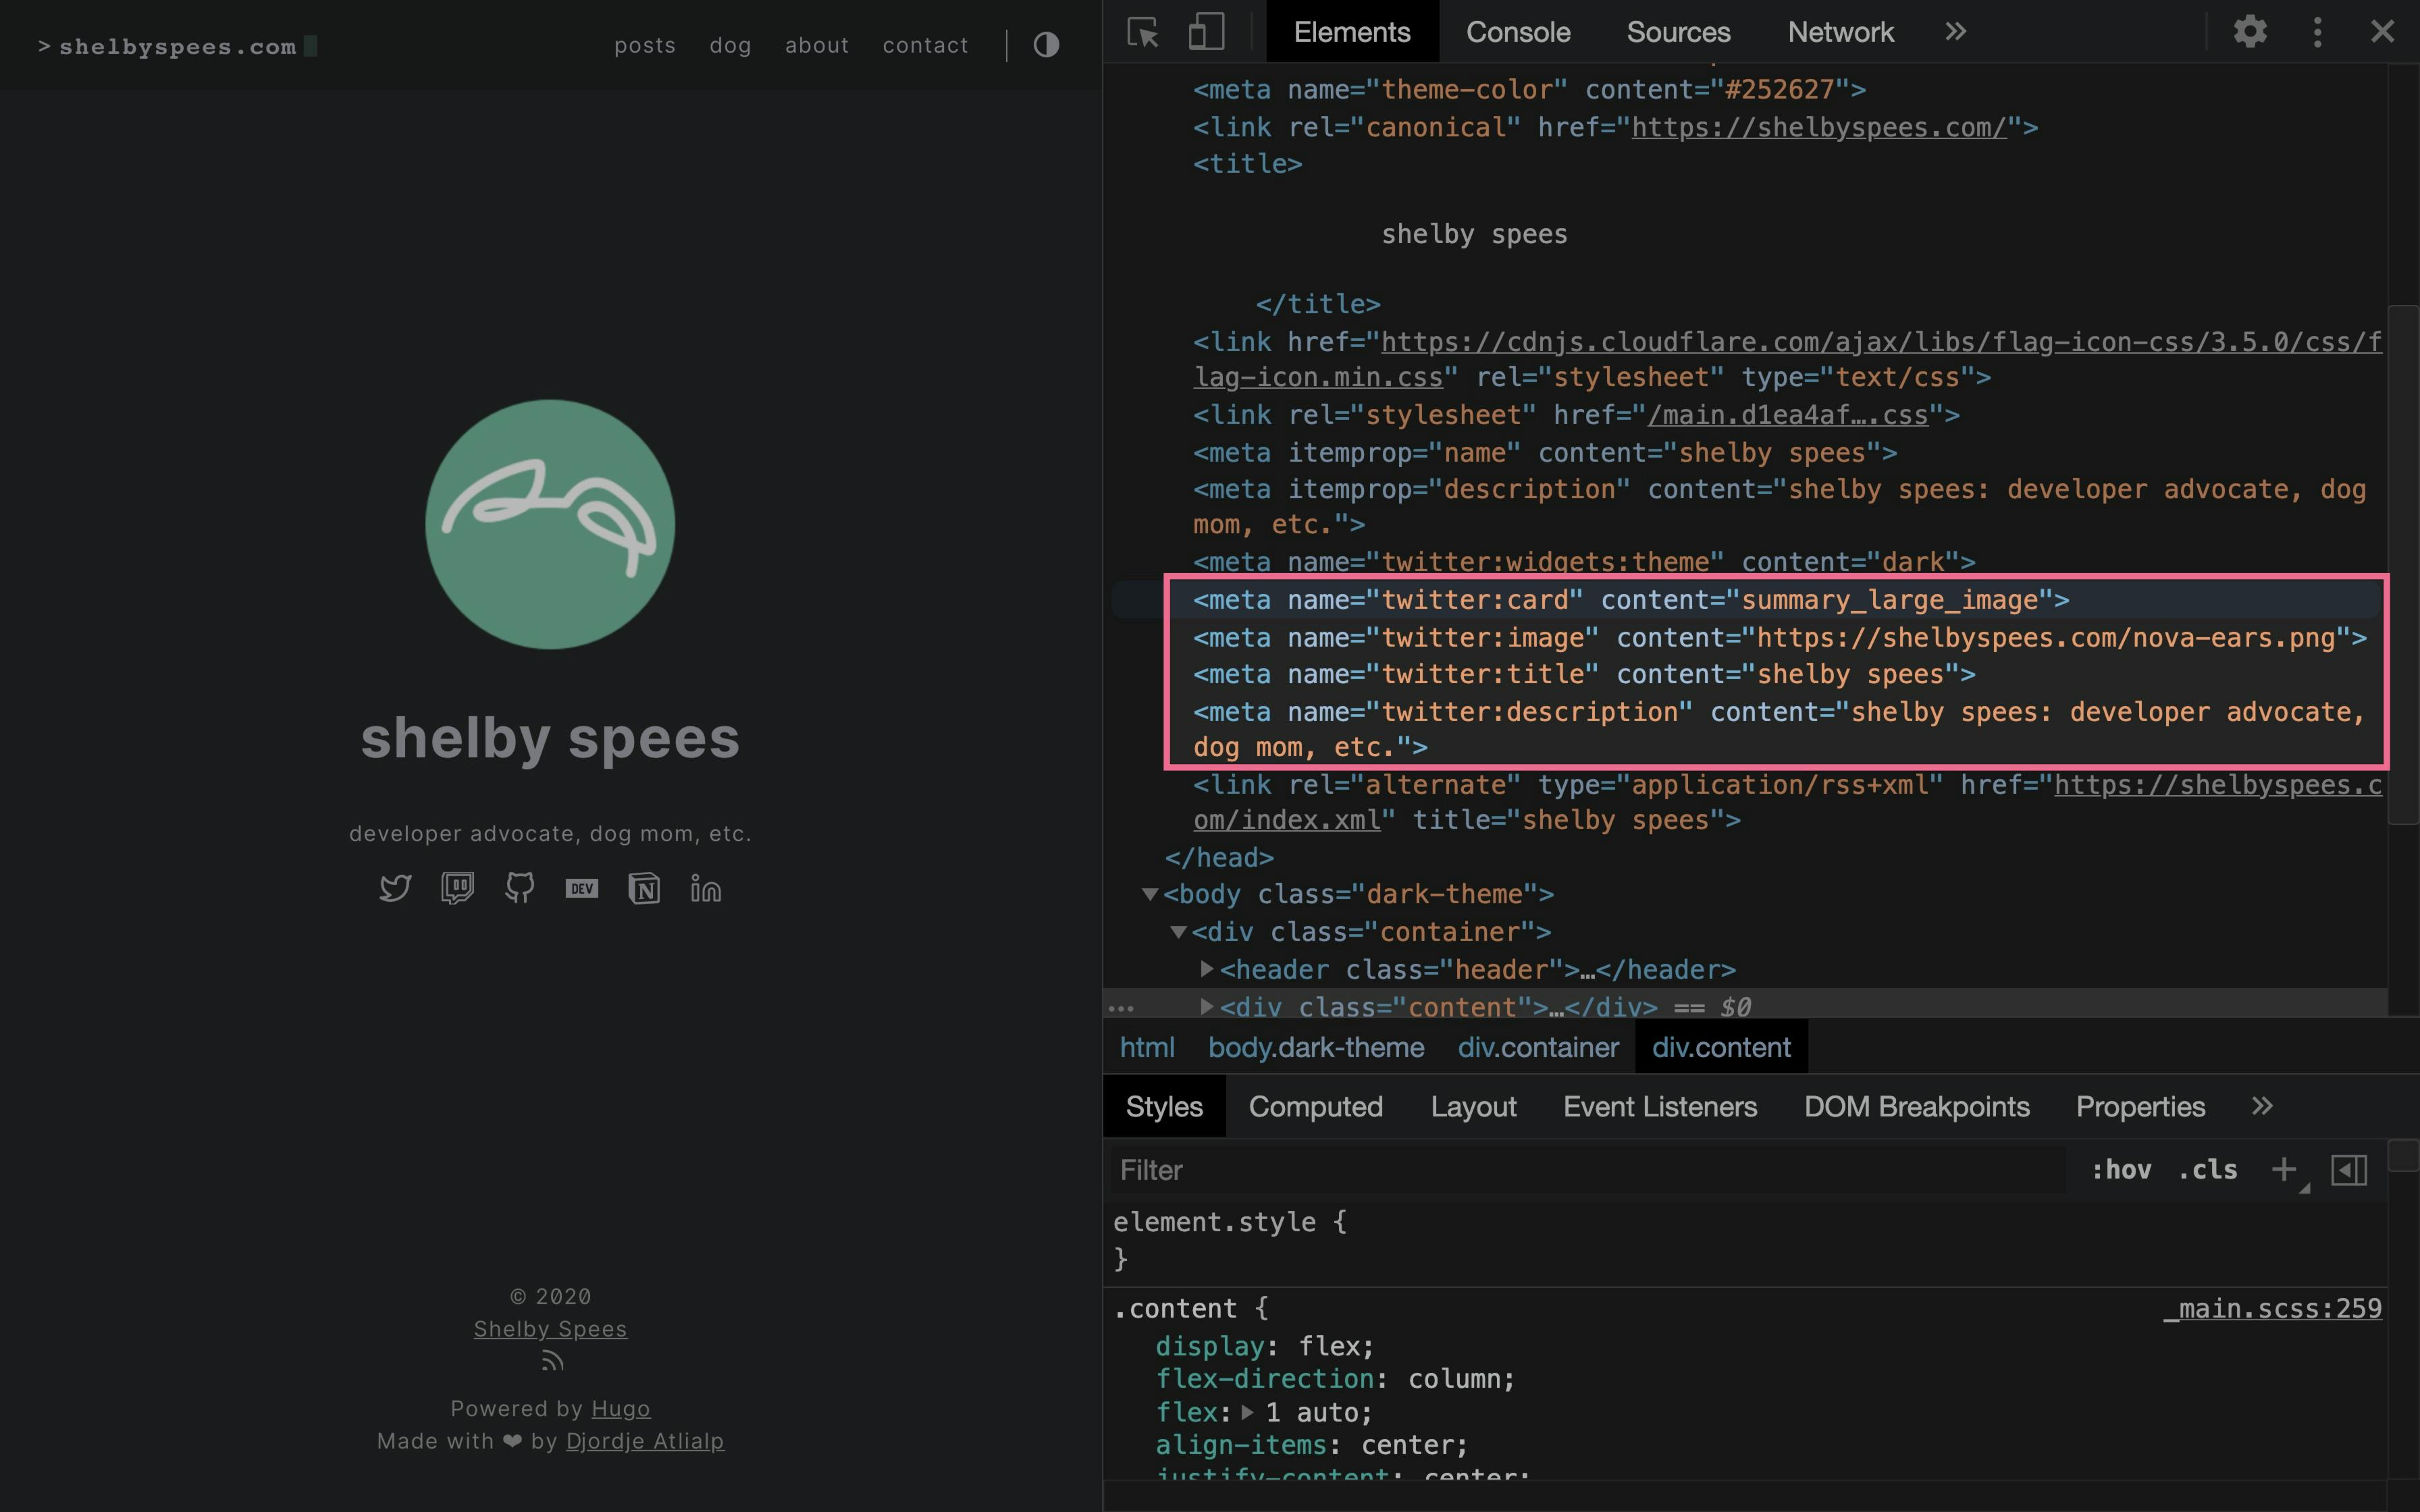 shelbyspees.com with Chrome devtools open, highlighting the Twitter meta tags